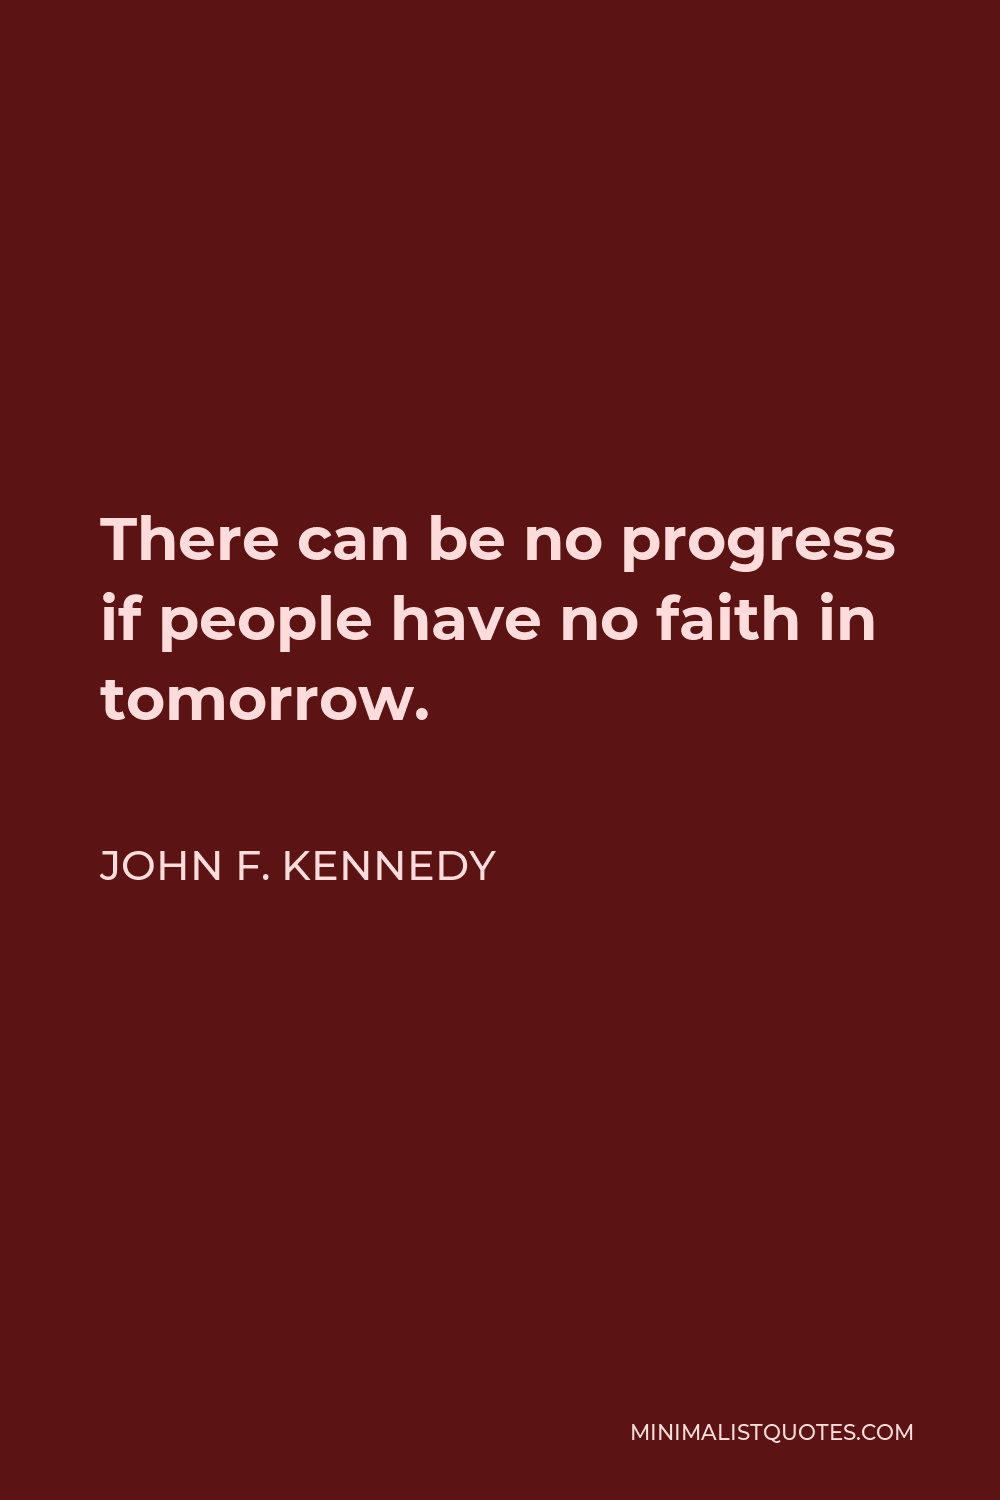 John F. Kennedy Quote - There can be no progress if people have no faith in tomorrow.